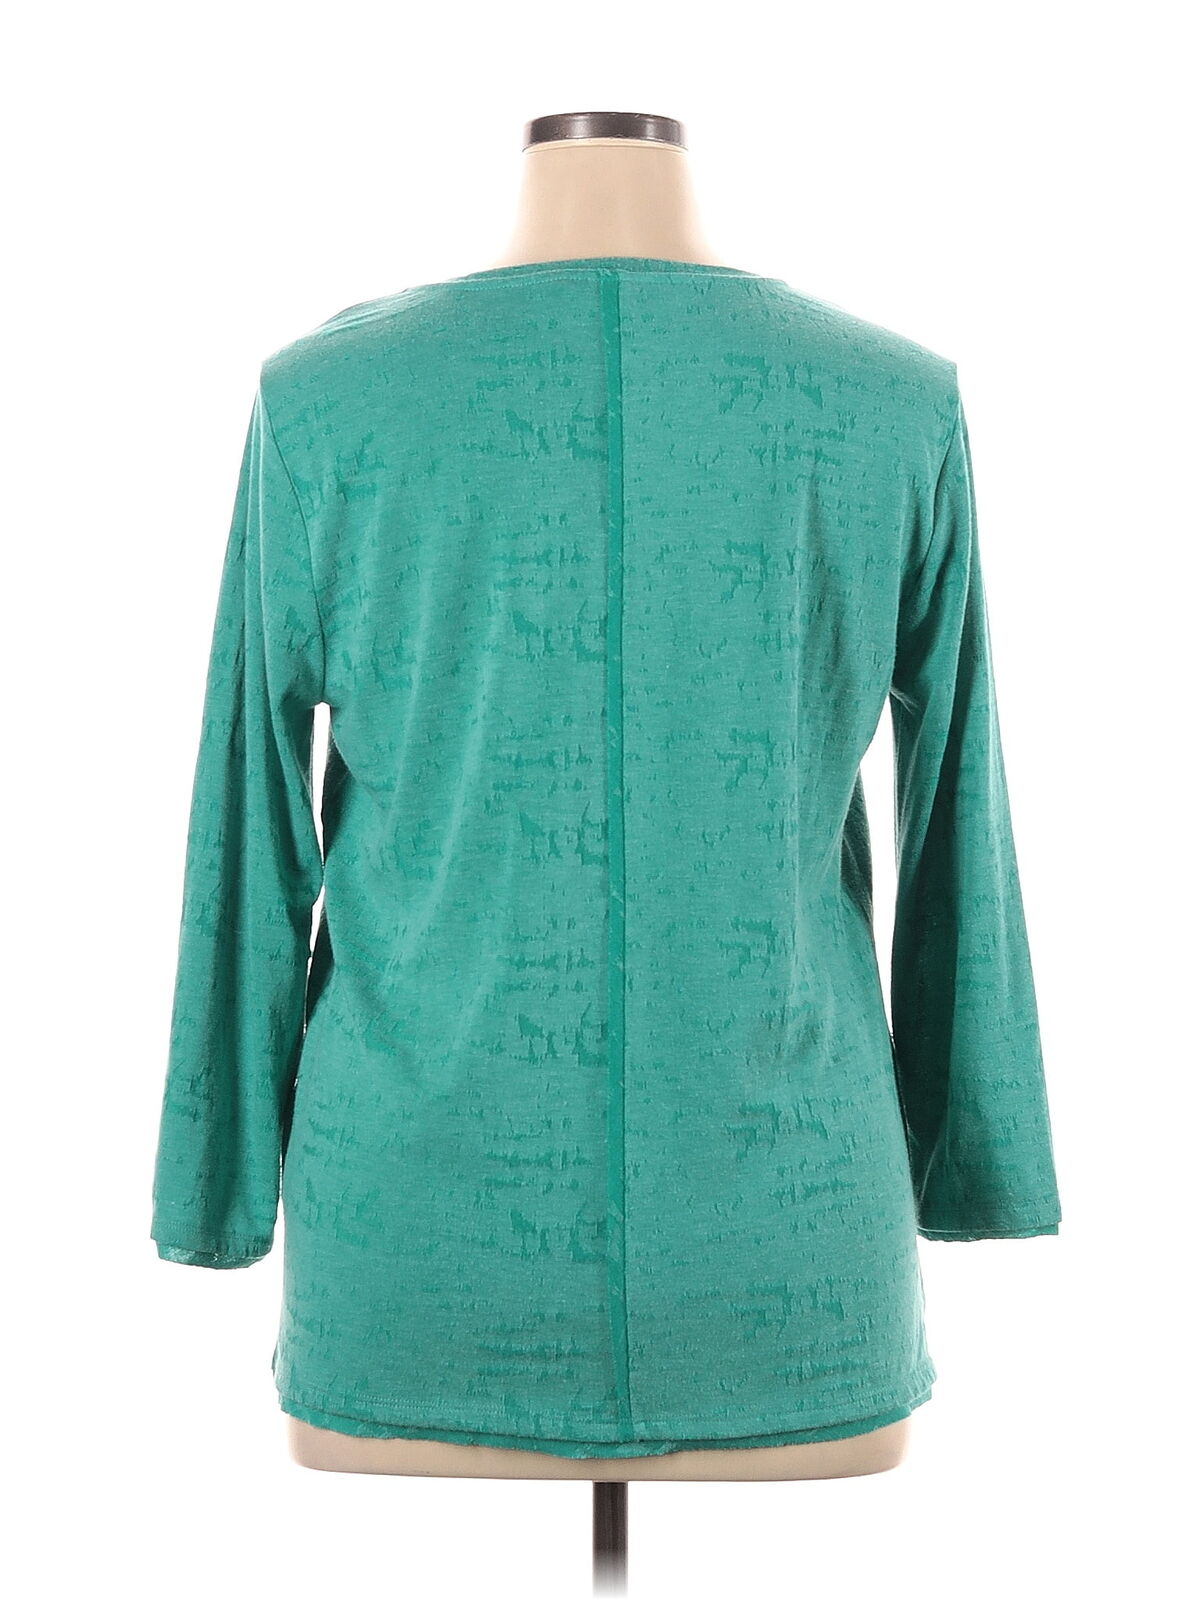 Westbound Women Green 3/4 Sleeve Blouse XL - image 2